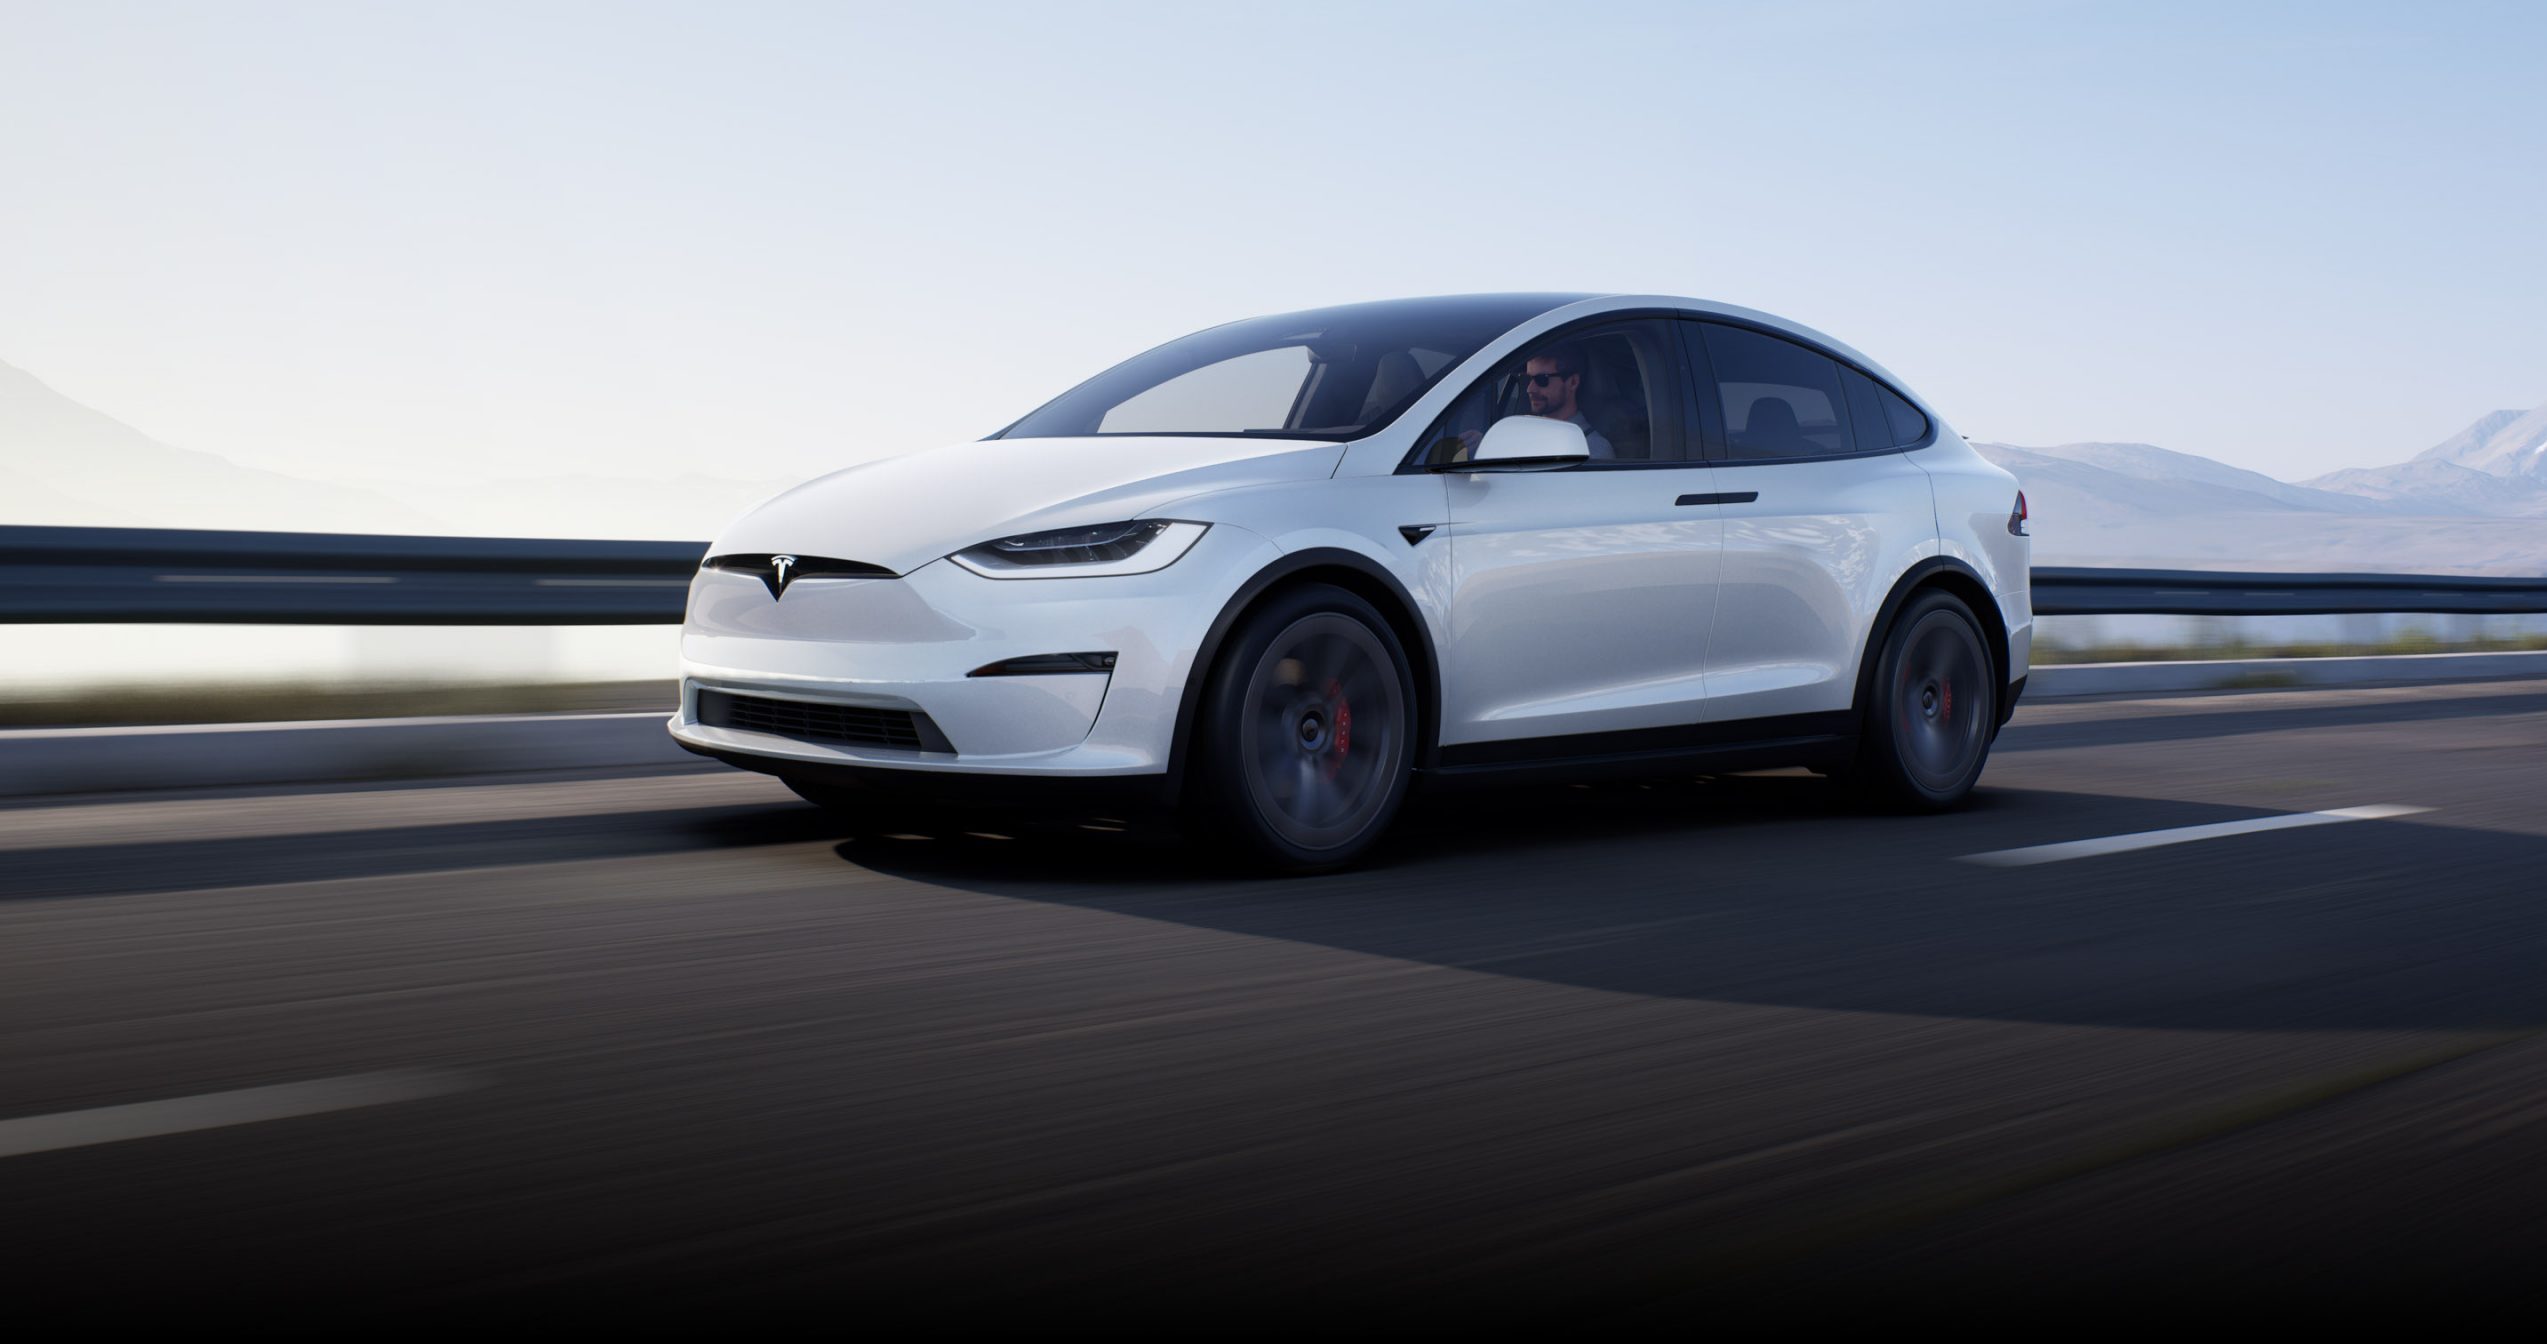 Tesla Model X Plaid interior options dwindle down to six-seat configuration only